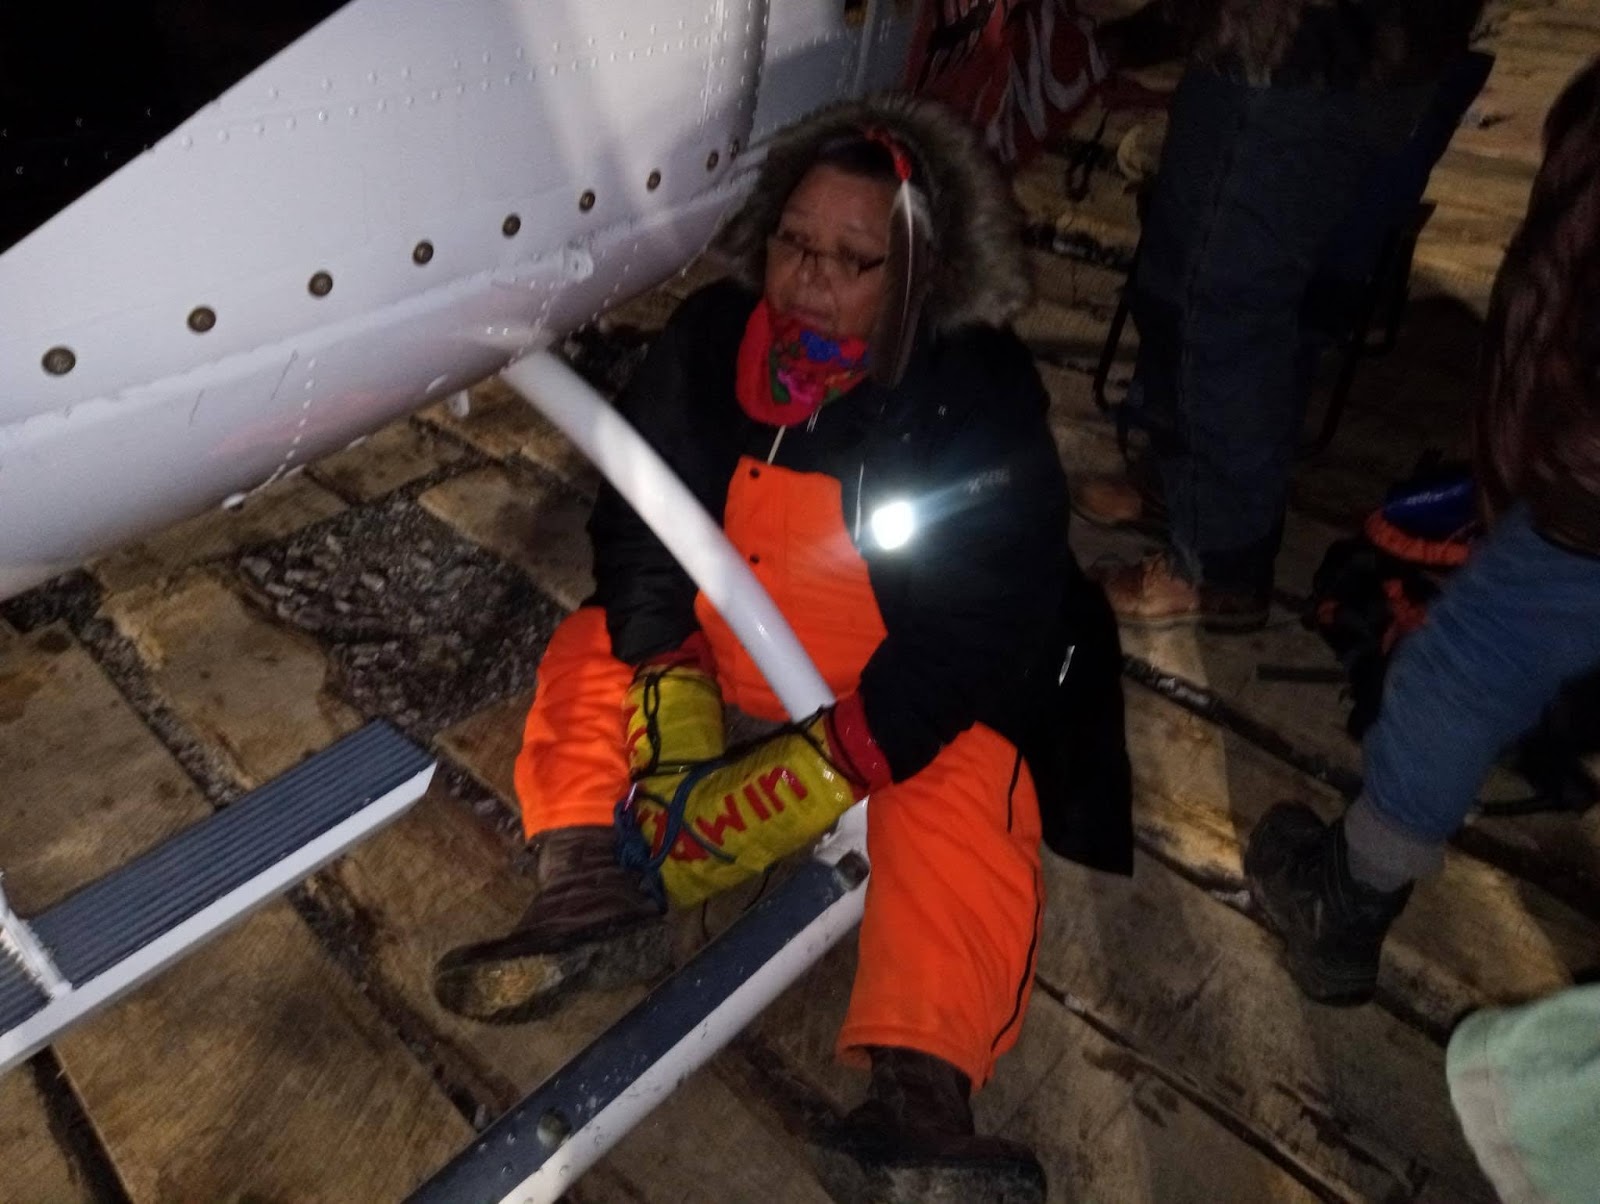 An indigenous female activist sits handcuffed to the base of a helicopter